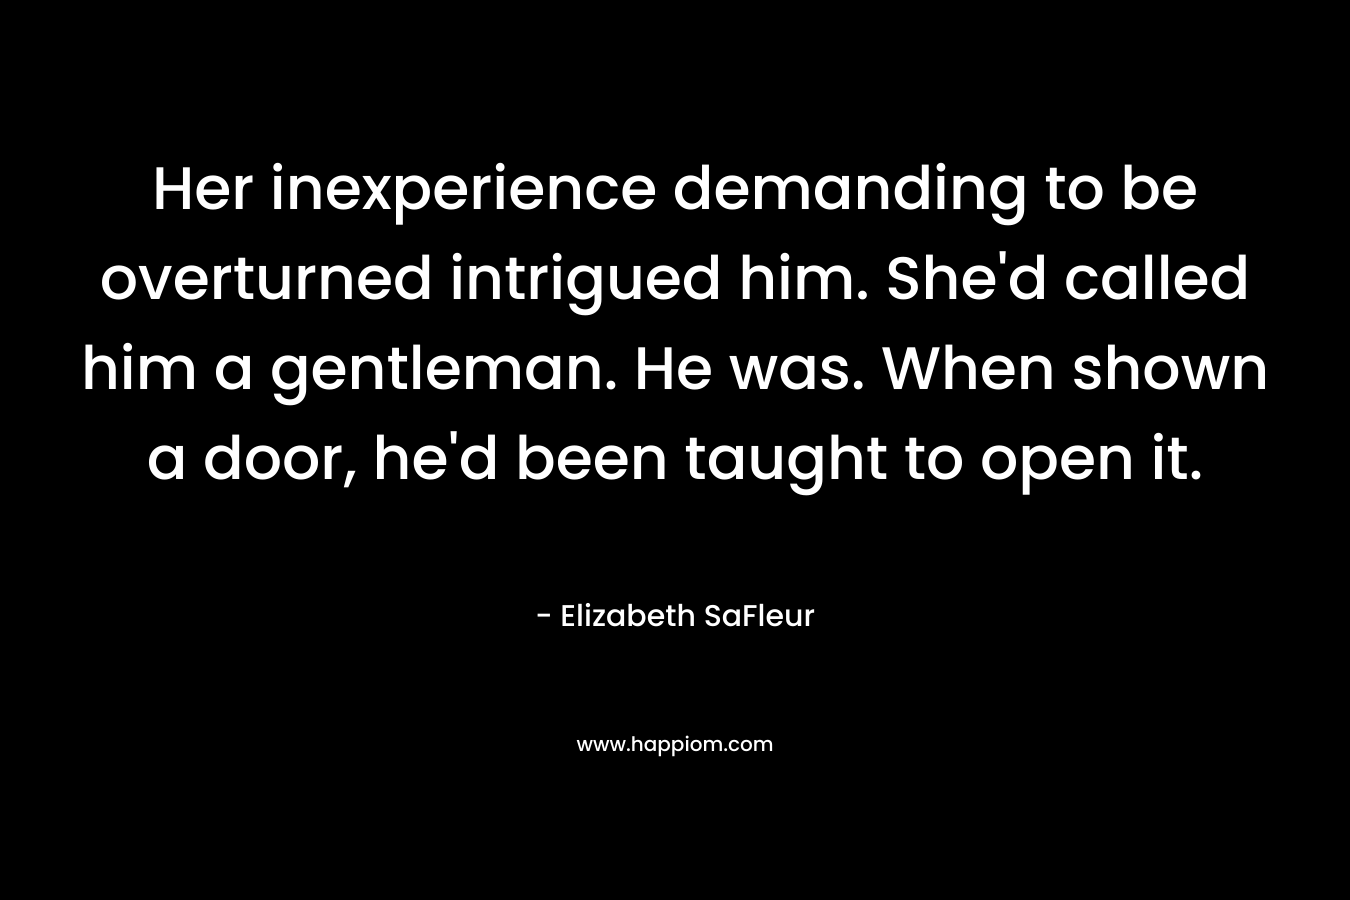 Her inexperience demanding to be overturned intrigued him. She’d called him a gentleman. He was. When shown a door, he’d been taught to open it. – Elizabeth SaFleur